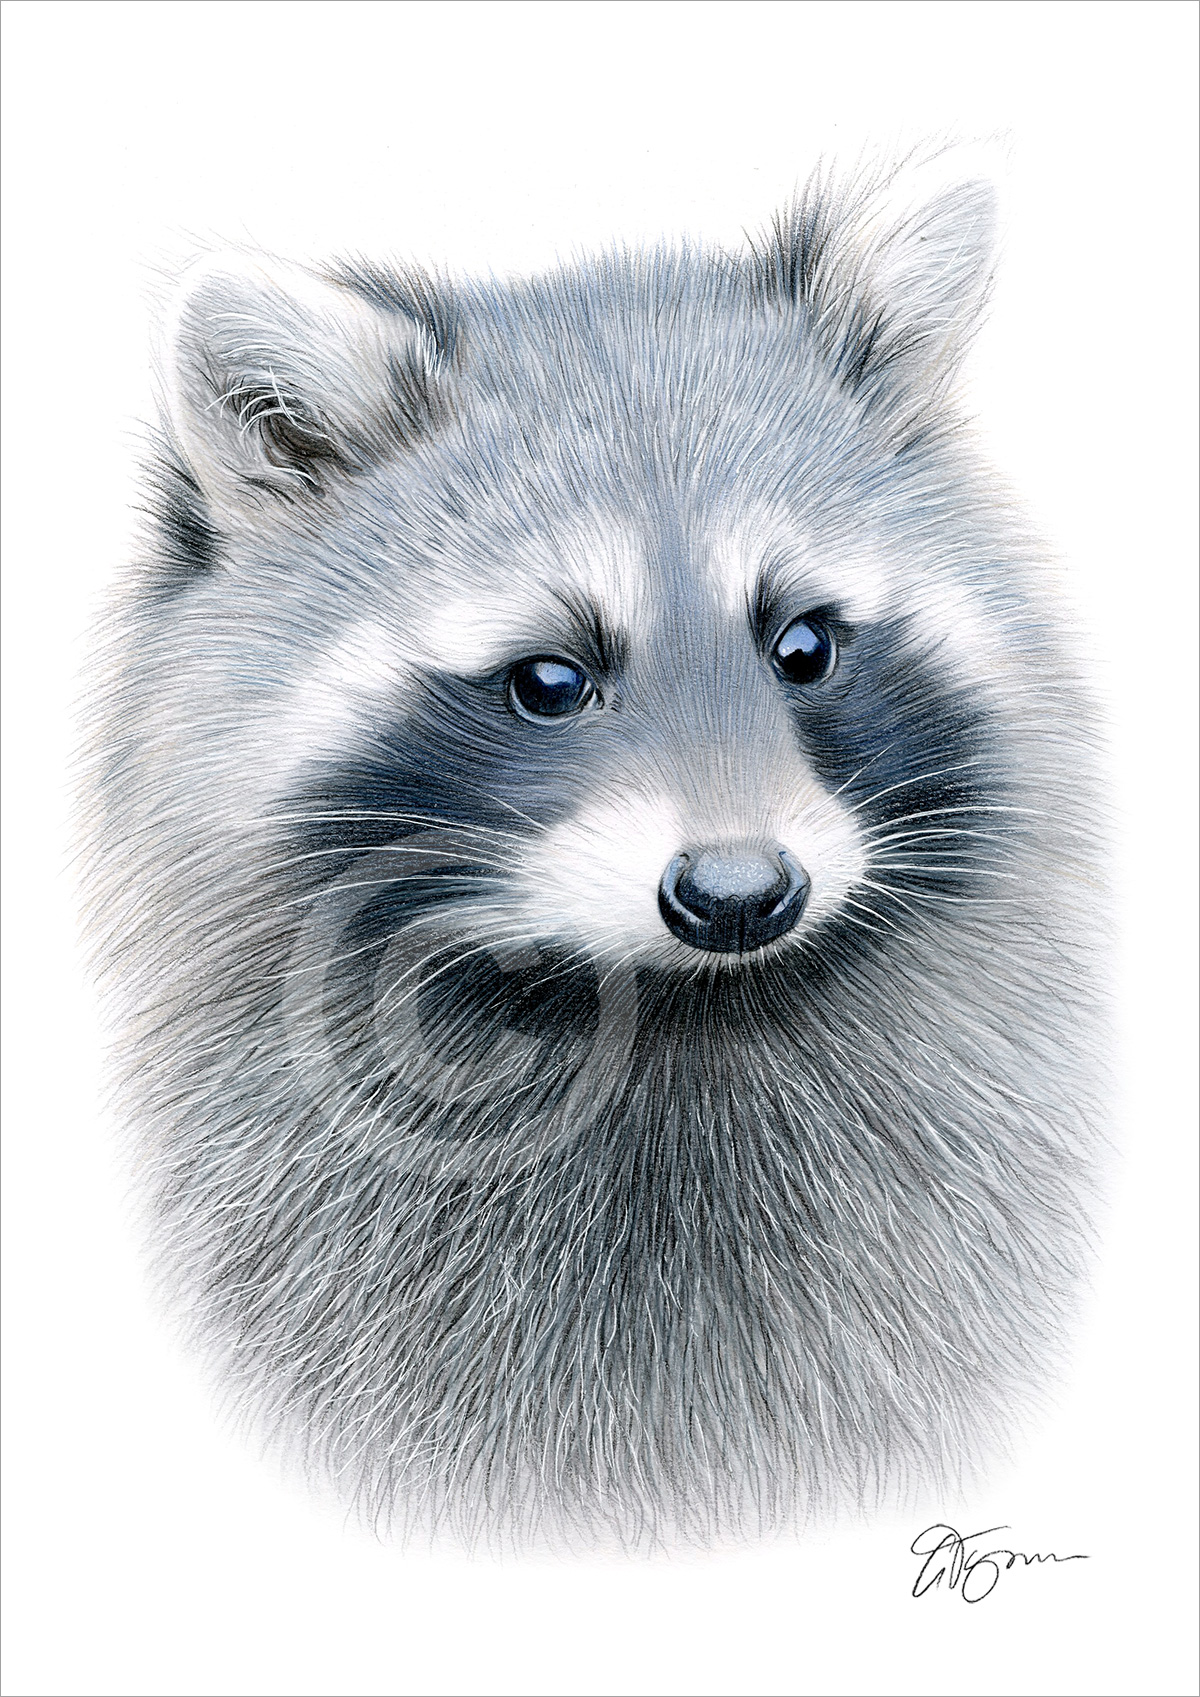 Colour pencil drawing of a raccoon by artist Gary Tymon